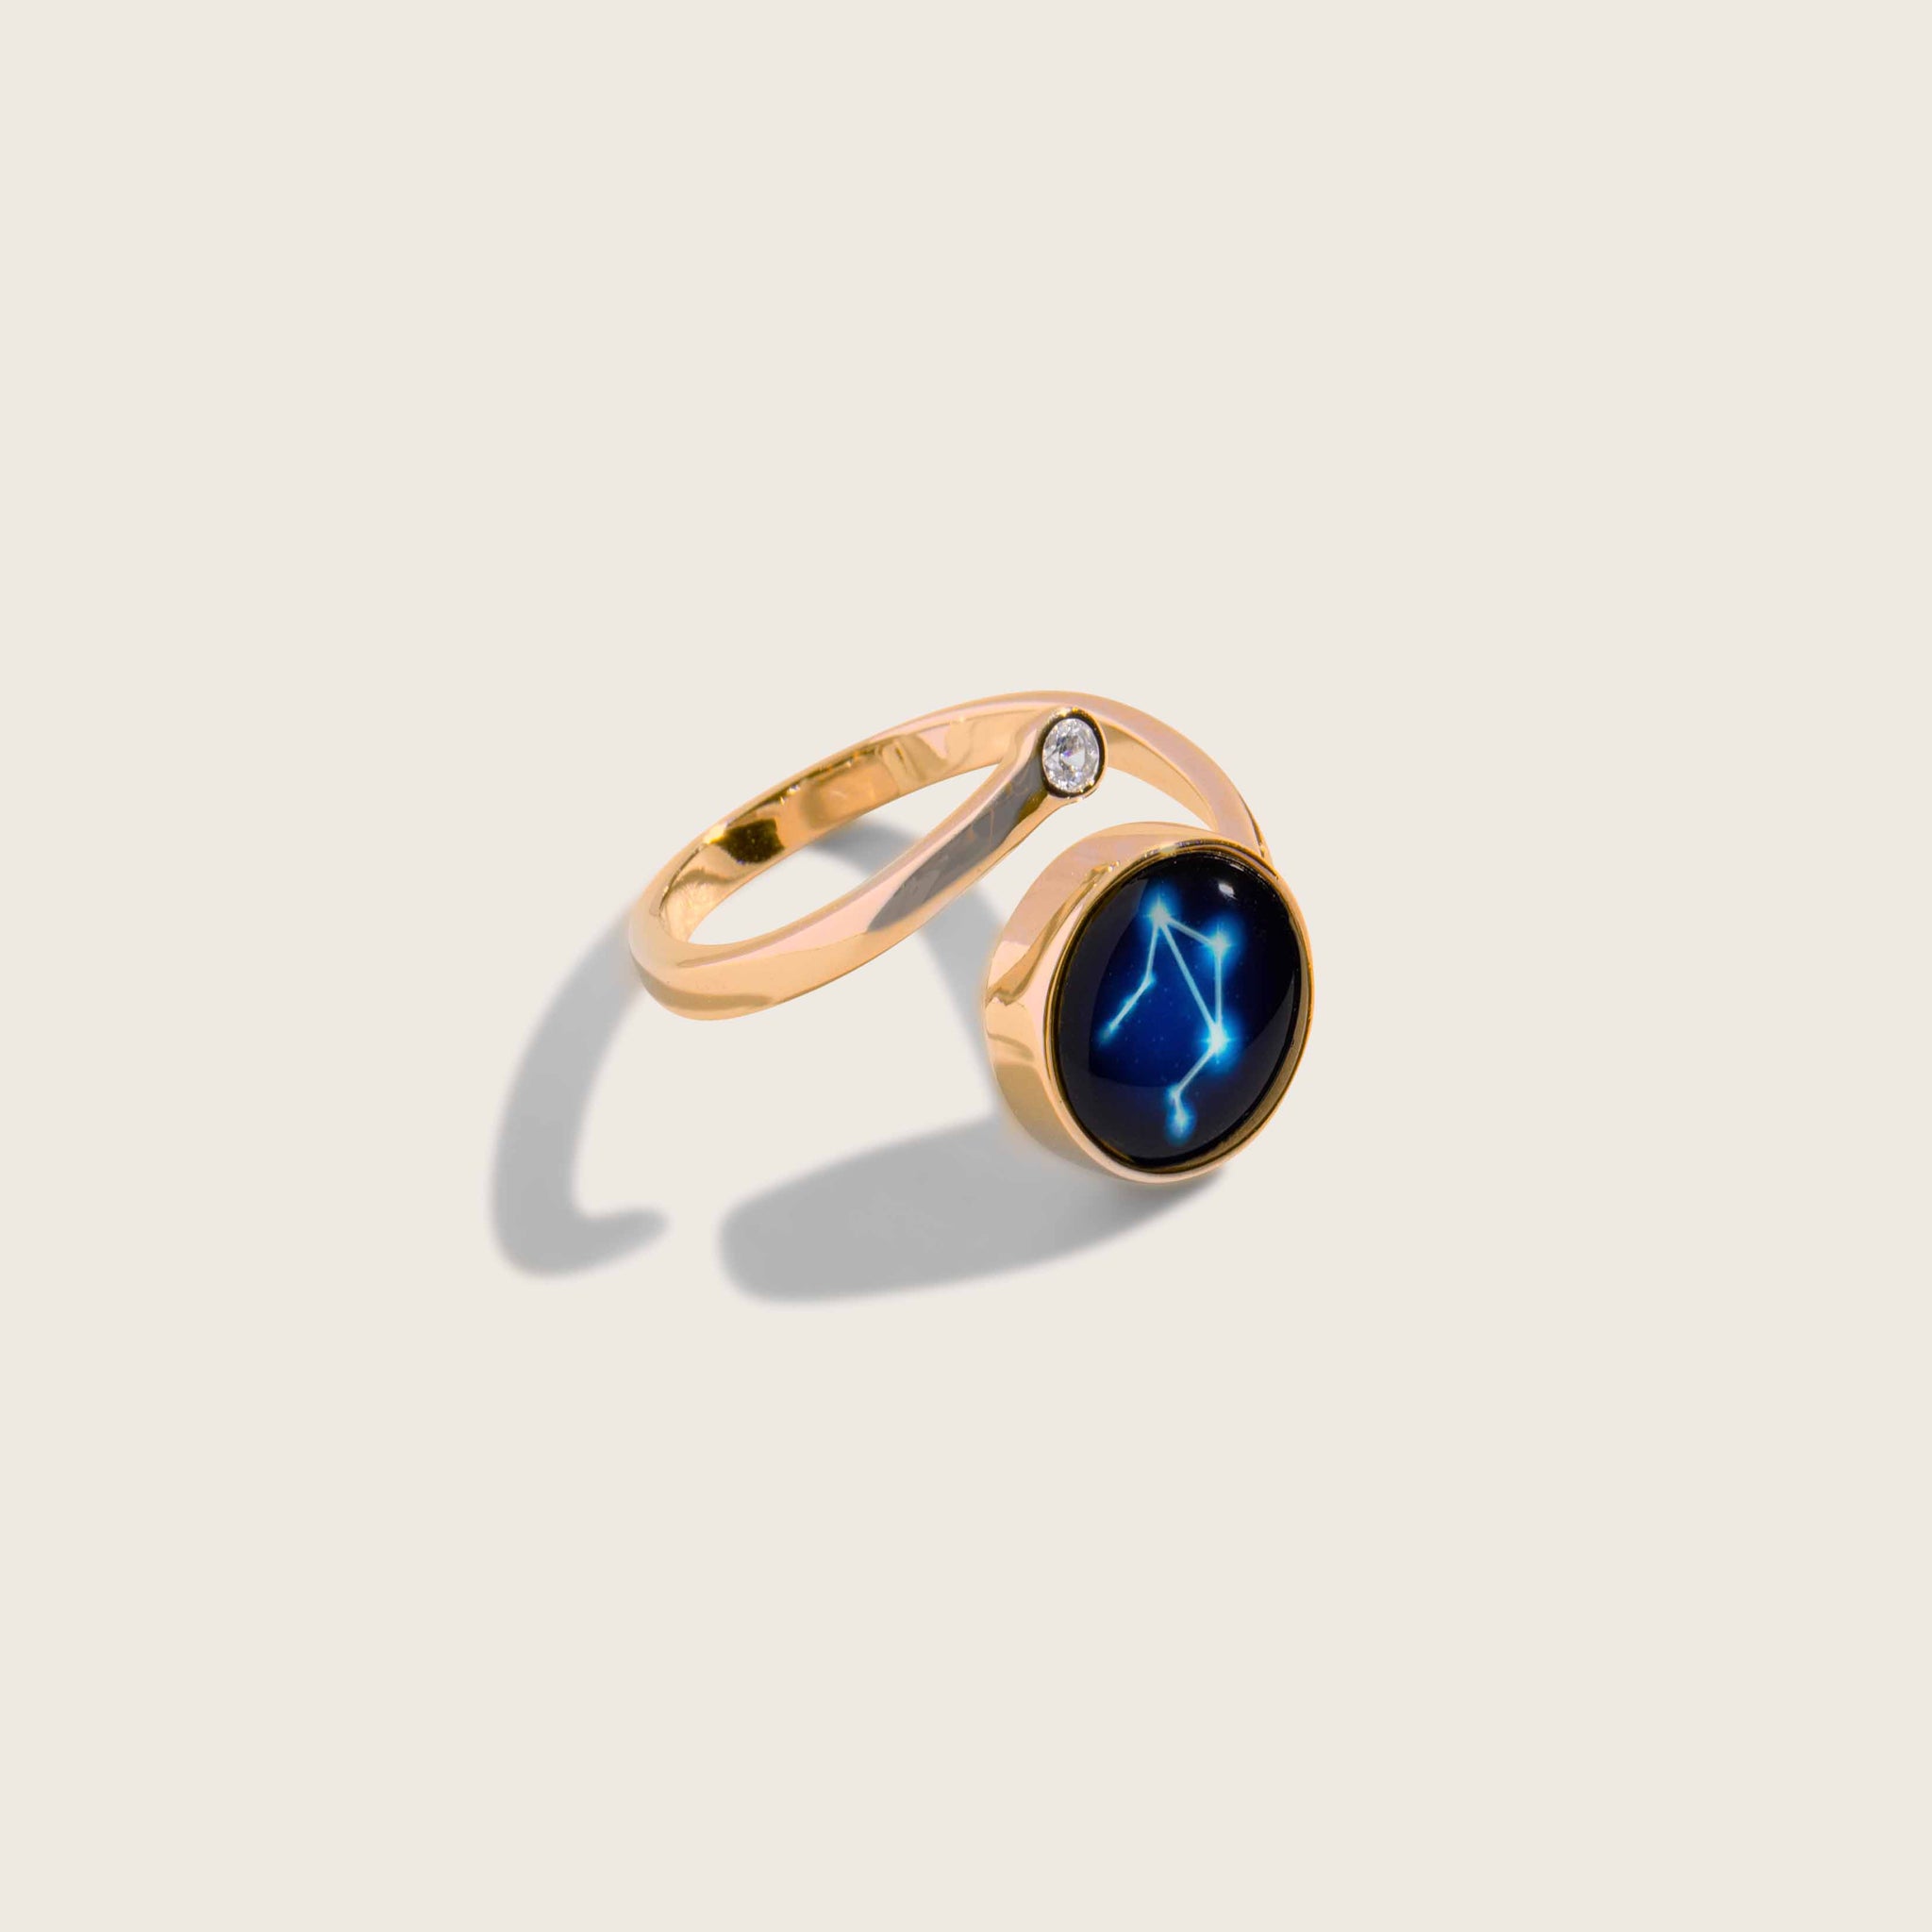 Astral Cosmic Spiral Ring in Gold